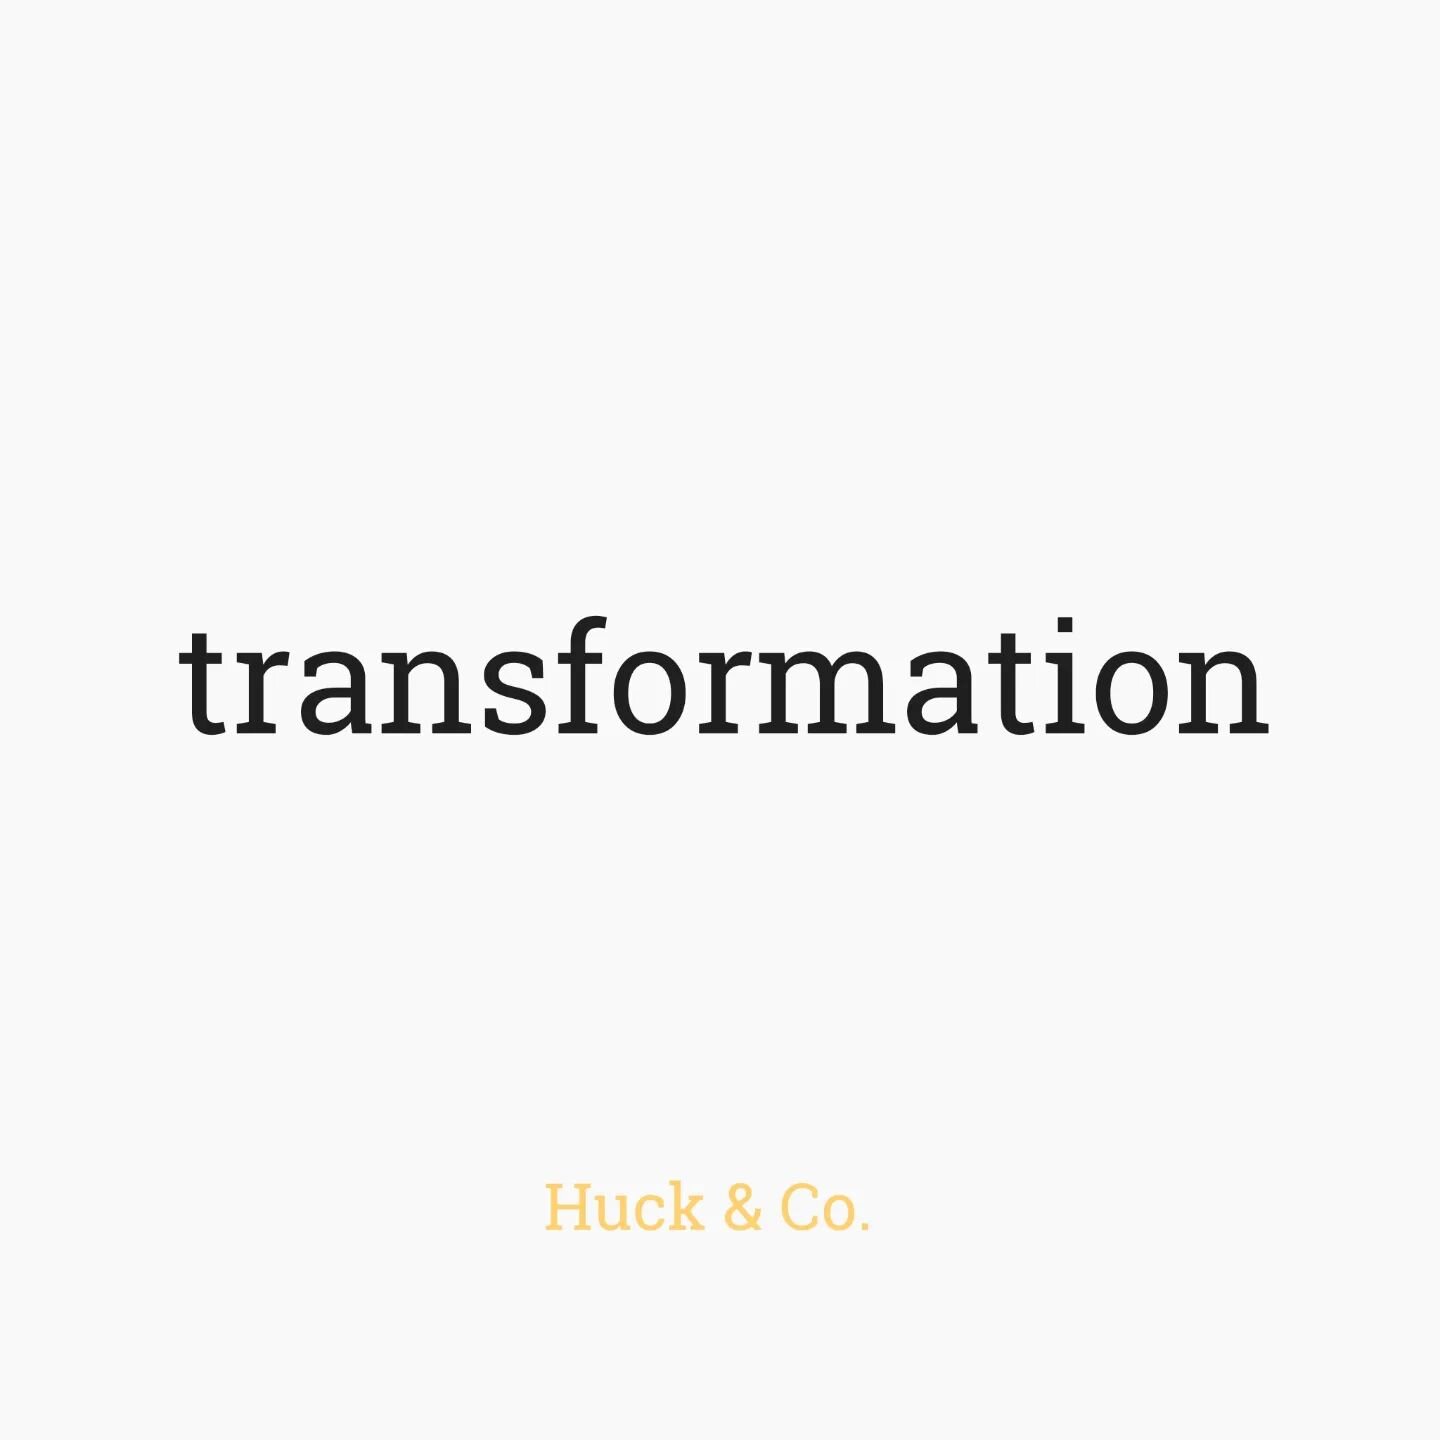 This is our transformation.  Huck &amp; Co. Is here to help. Set your intention daily for who you are. Say it in affirmation and become who you truly are. Set it, say it, be it. 
#lawofattraction #rebirth #joy #intentionsetting #love #happy #changeyo